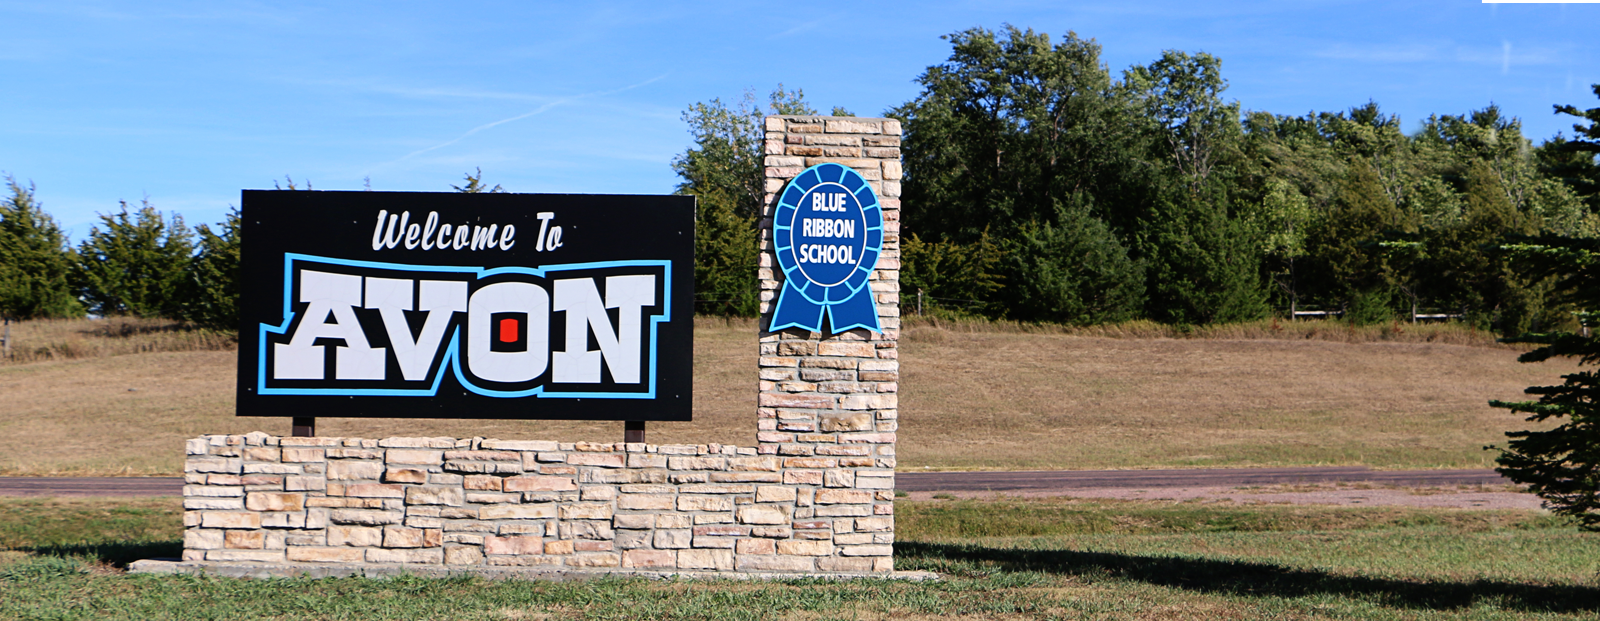 Welcome to Avon sign at the edge of town